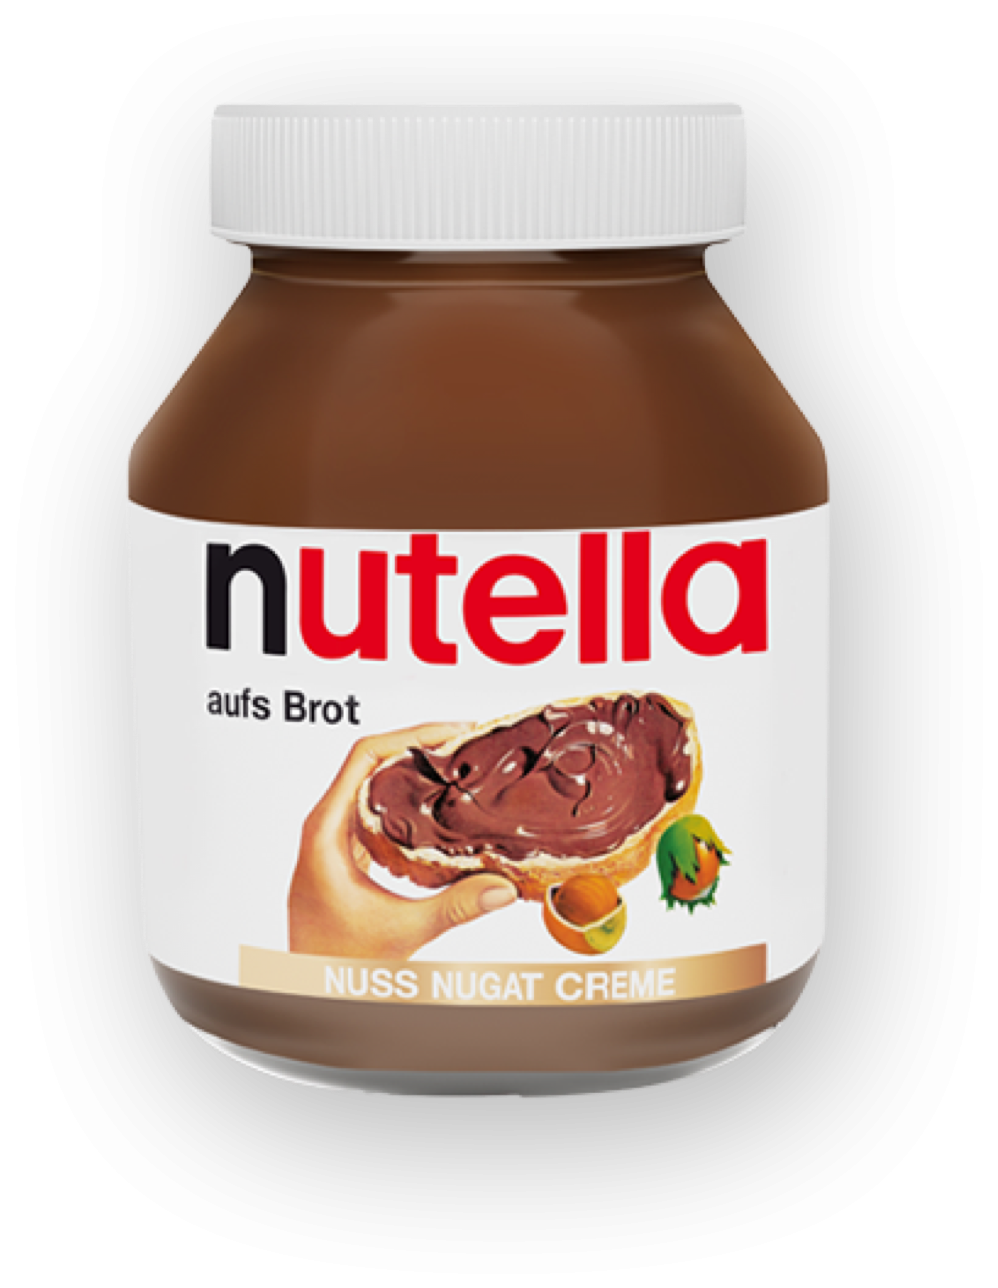 Our Iconic Jar | Nutella